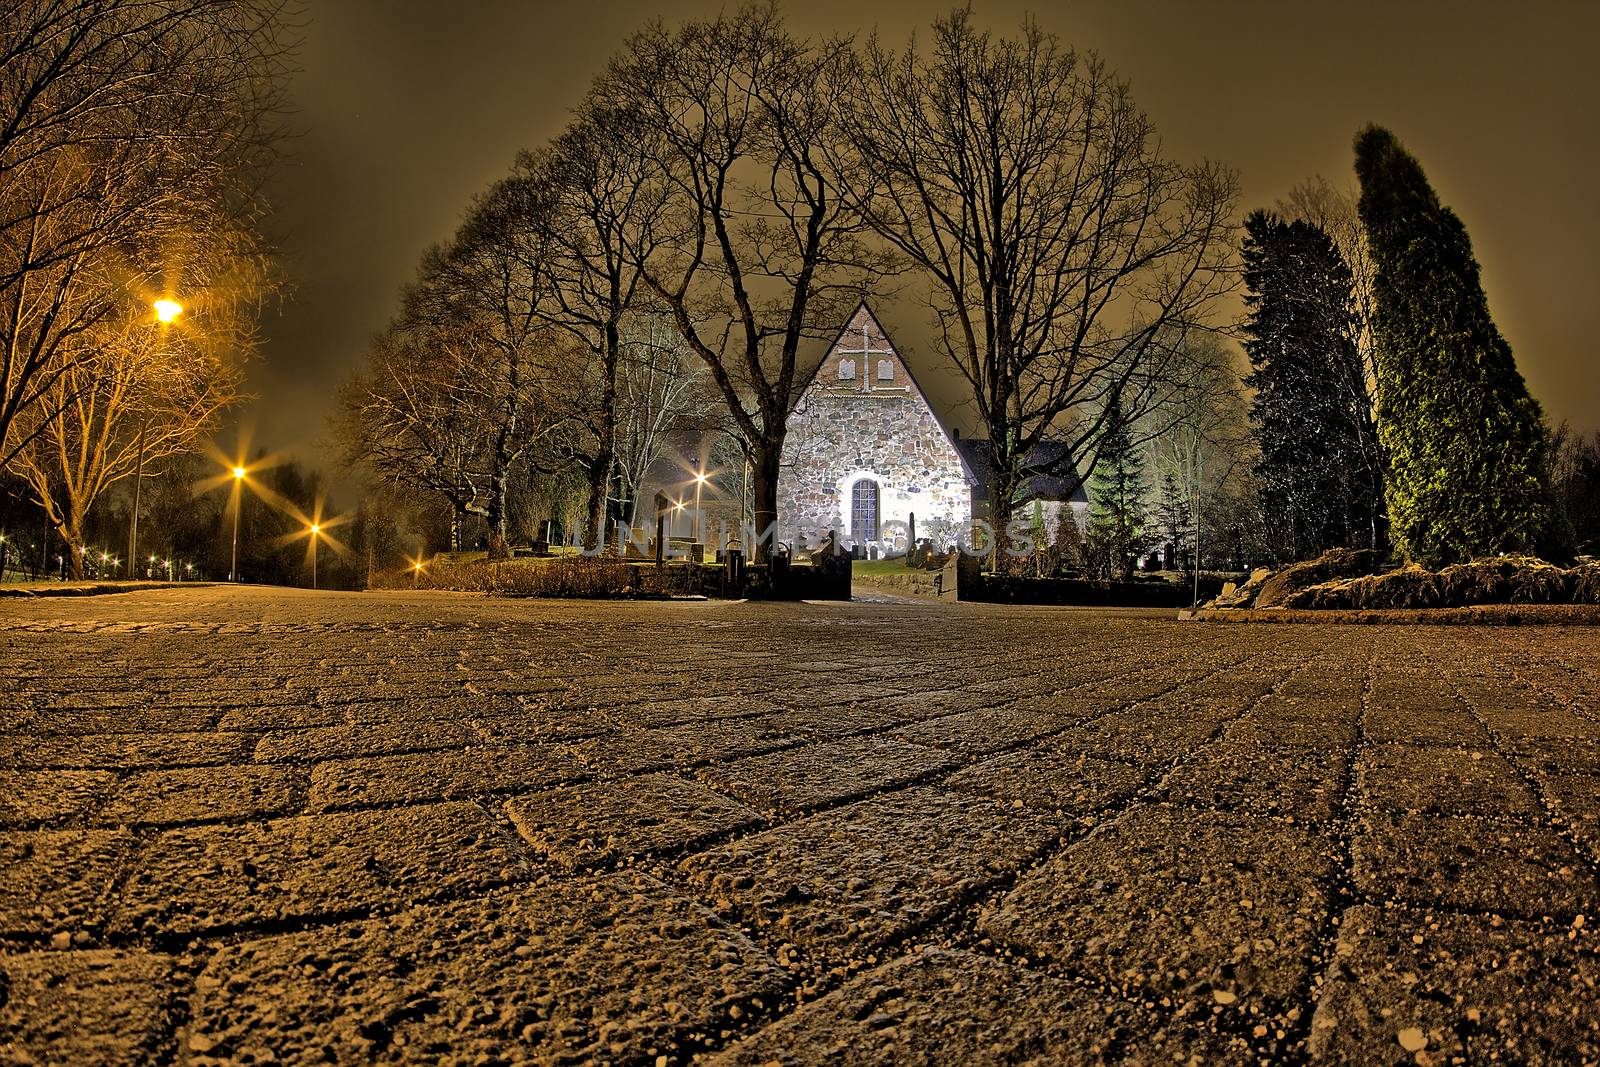 Low and wide angle night photo of a lighted church surrounded with trees. Sidewalk made of stones on the foreground.